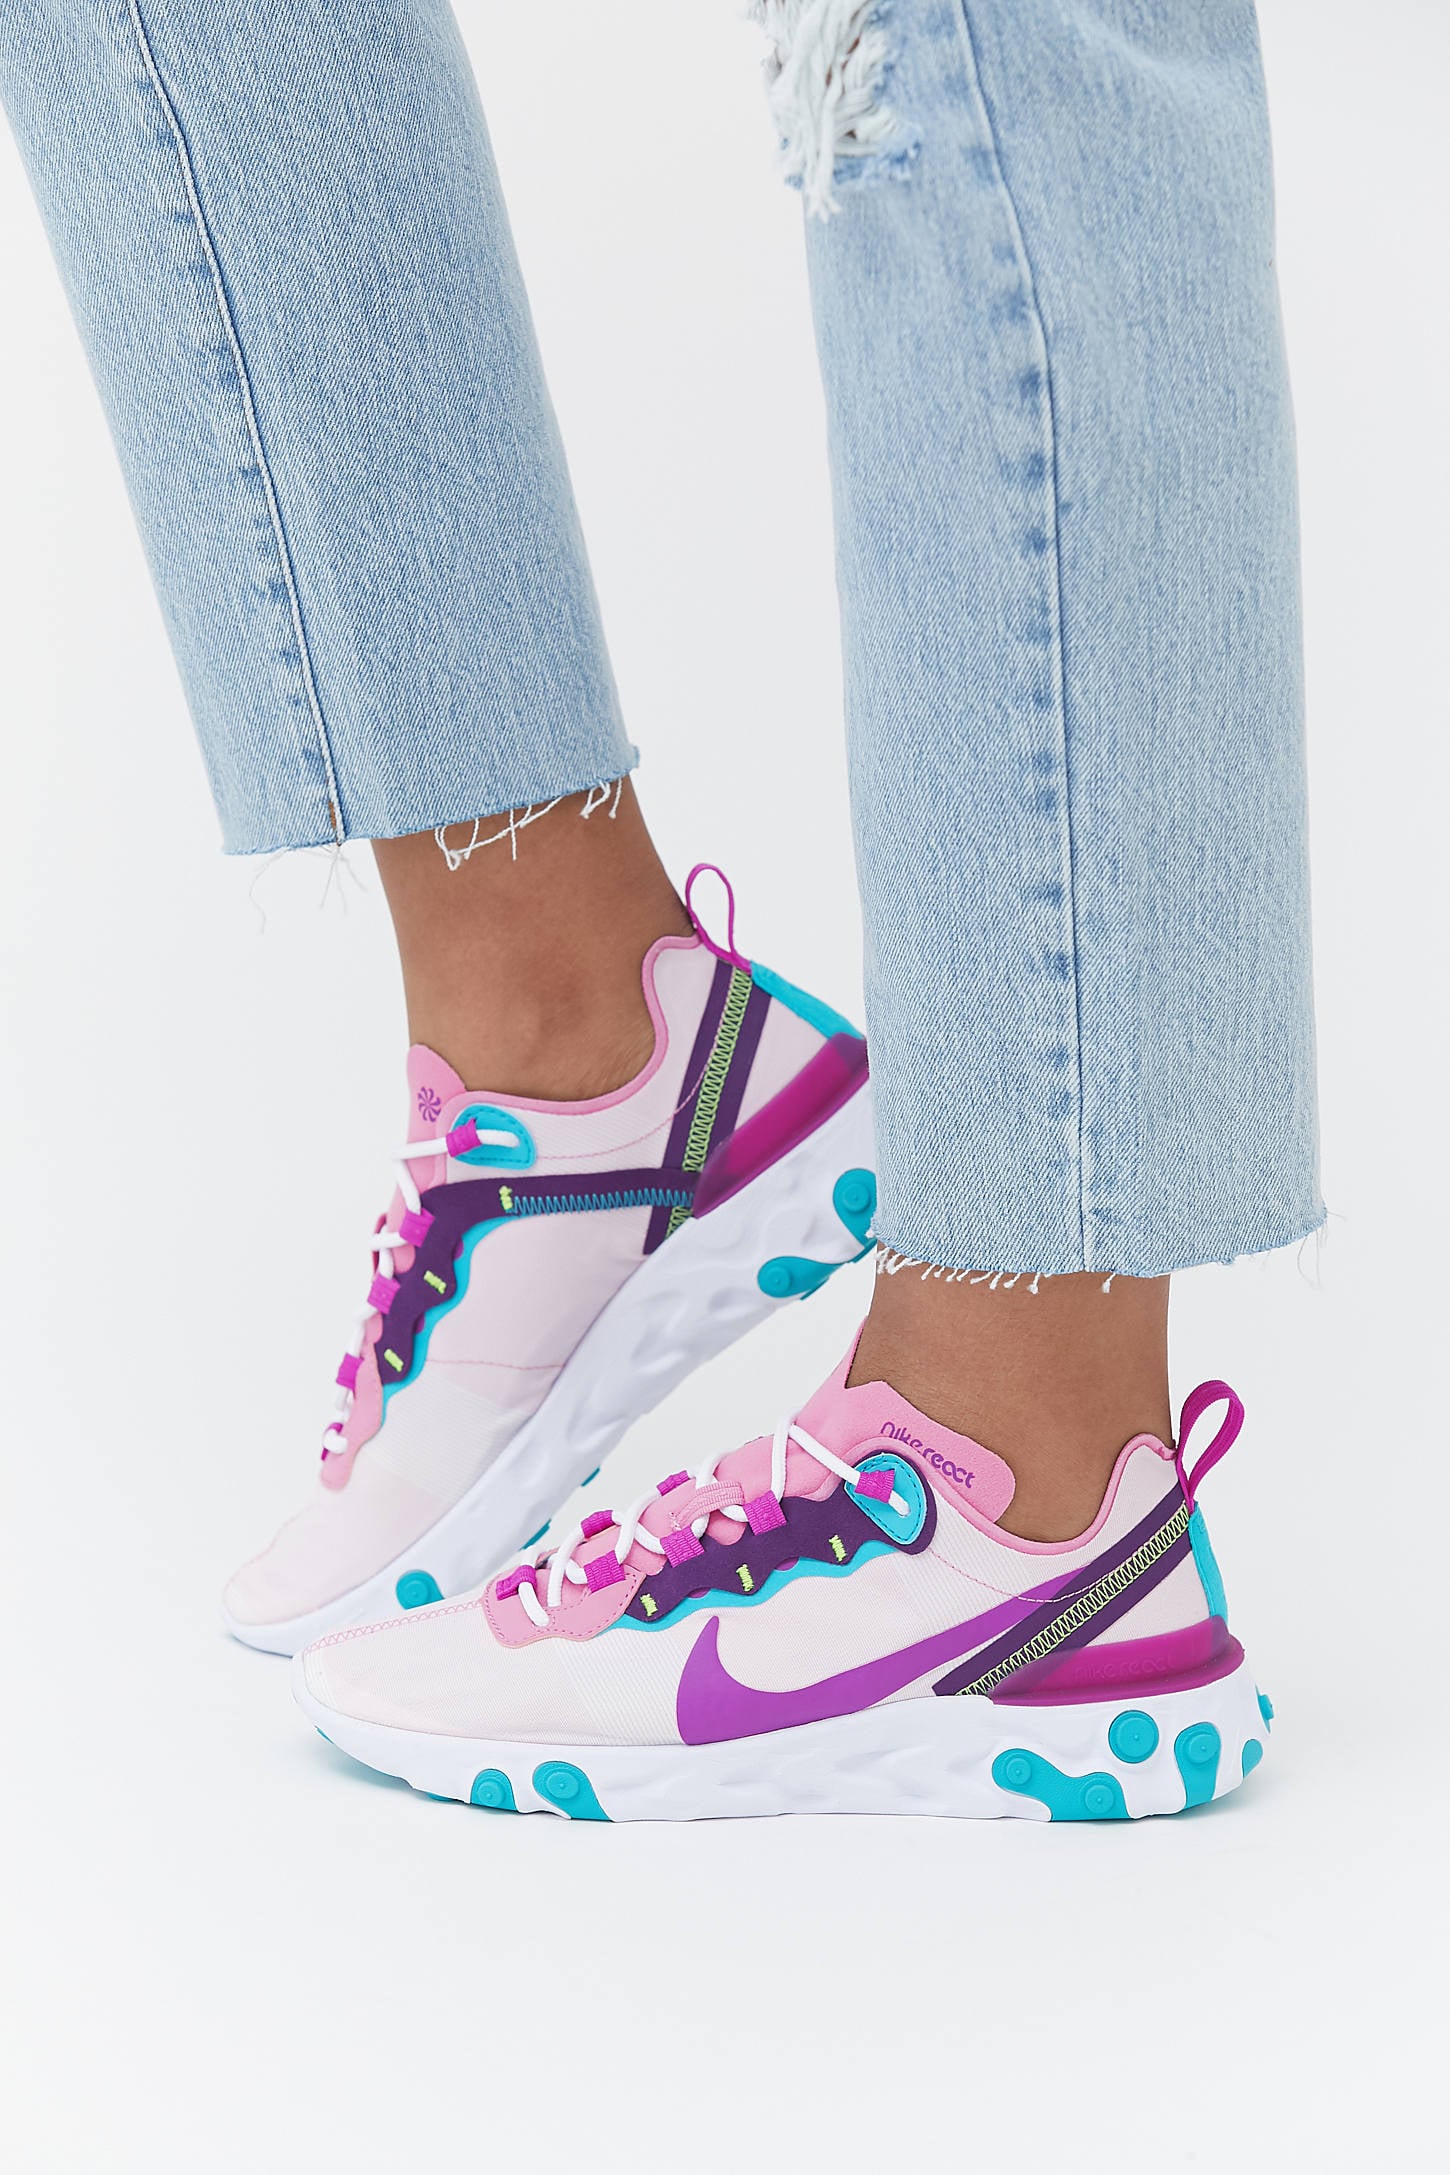 blue and purple sneakers